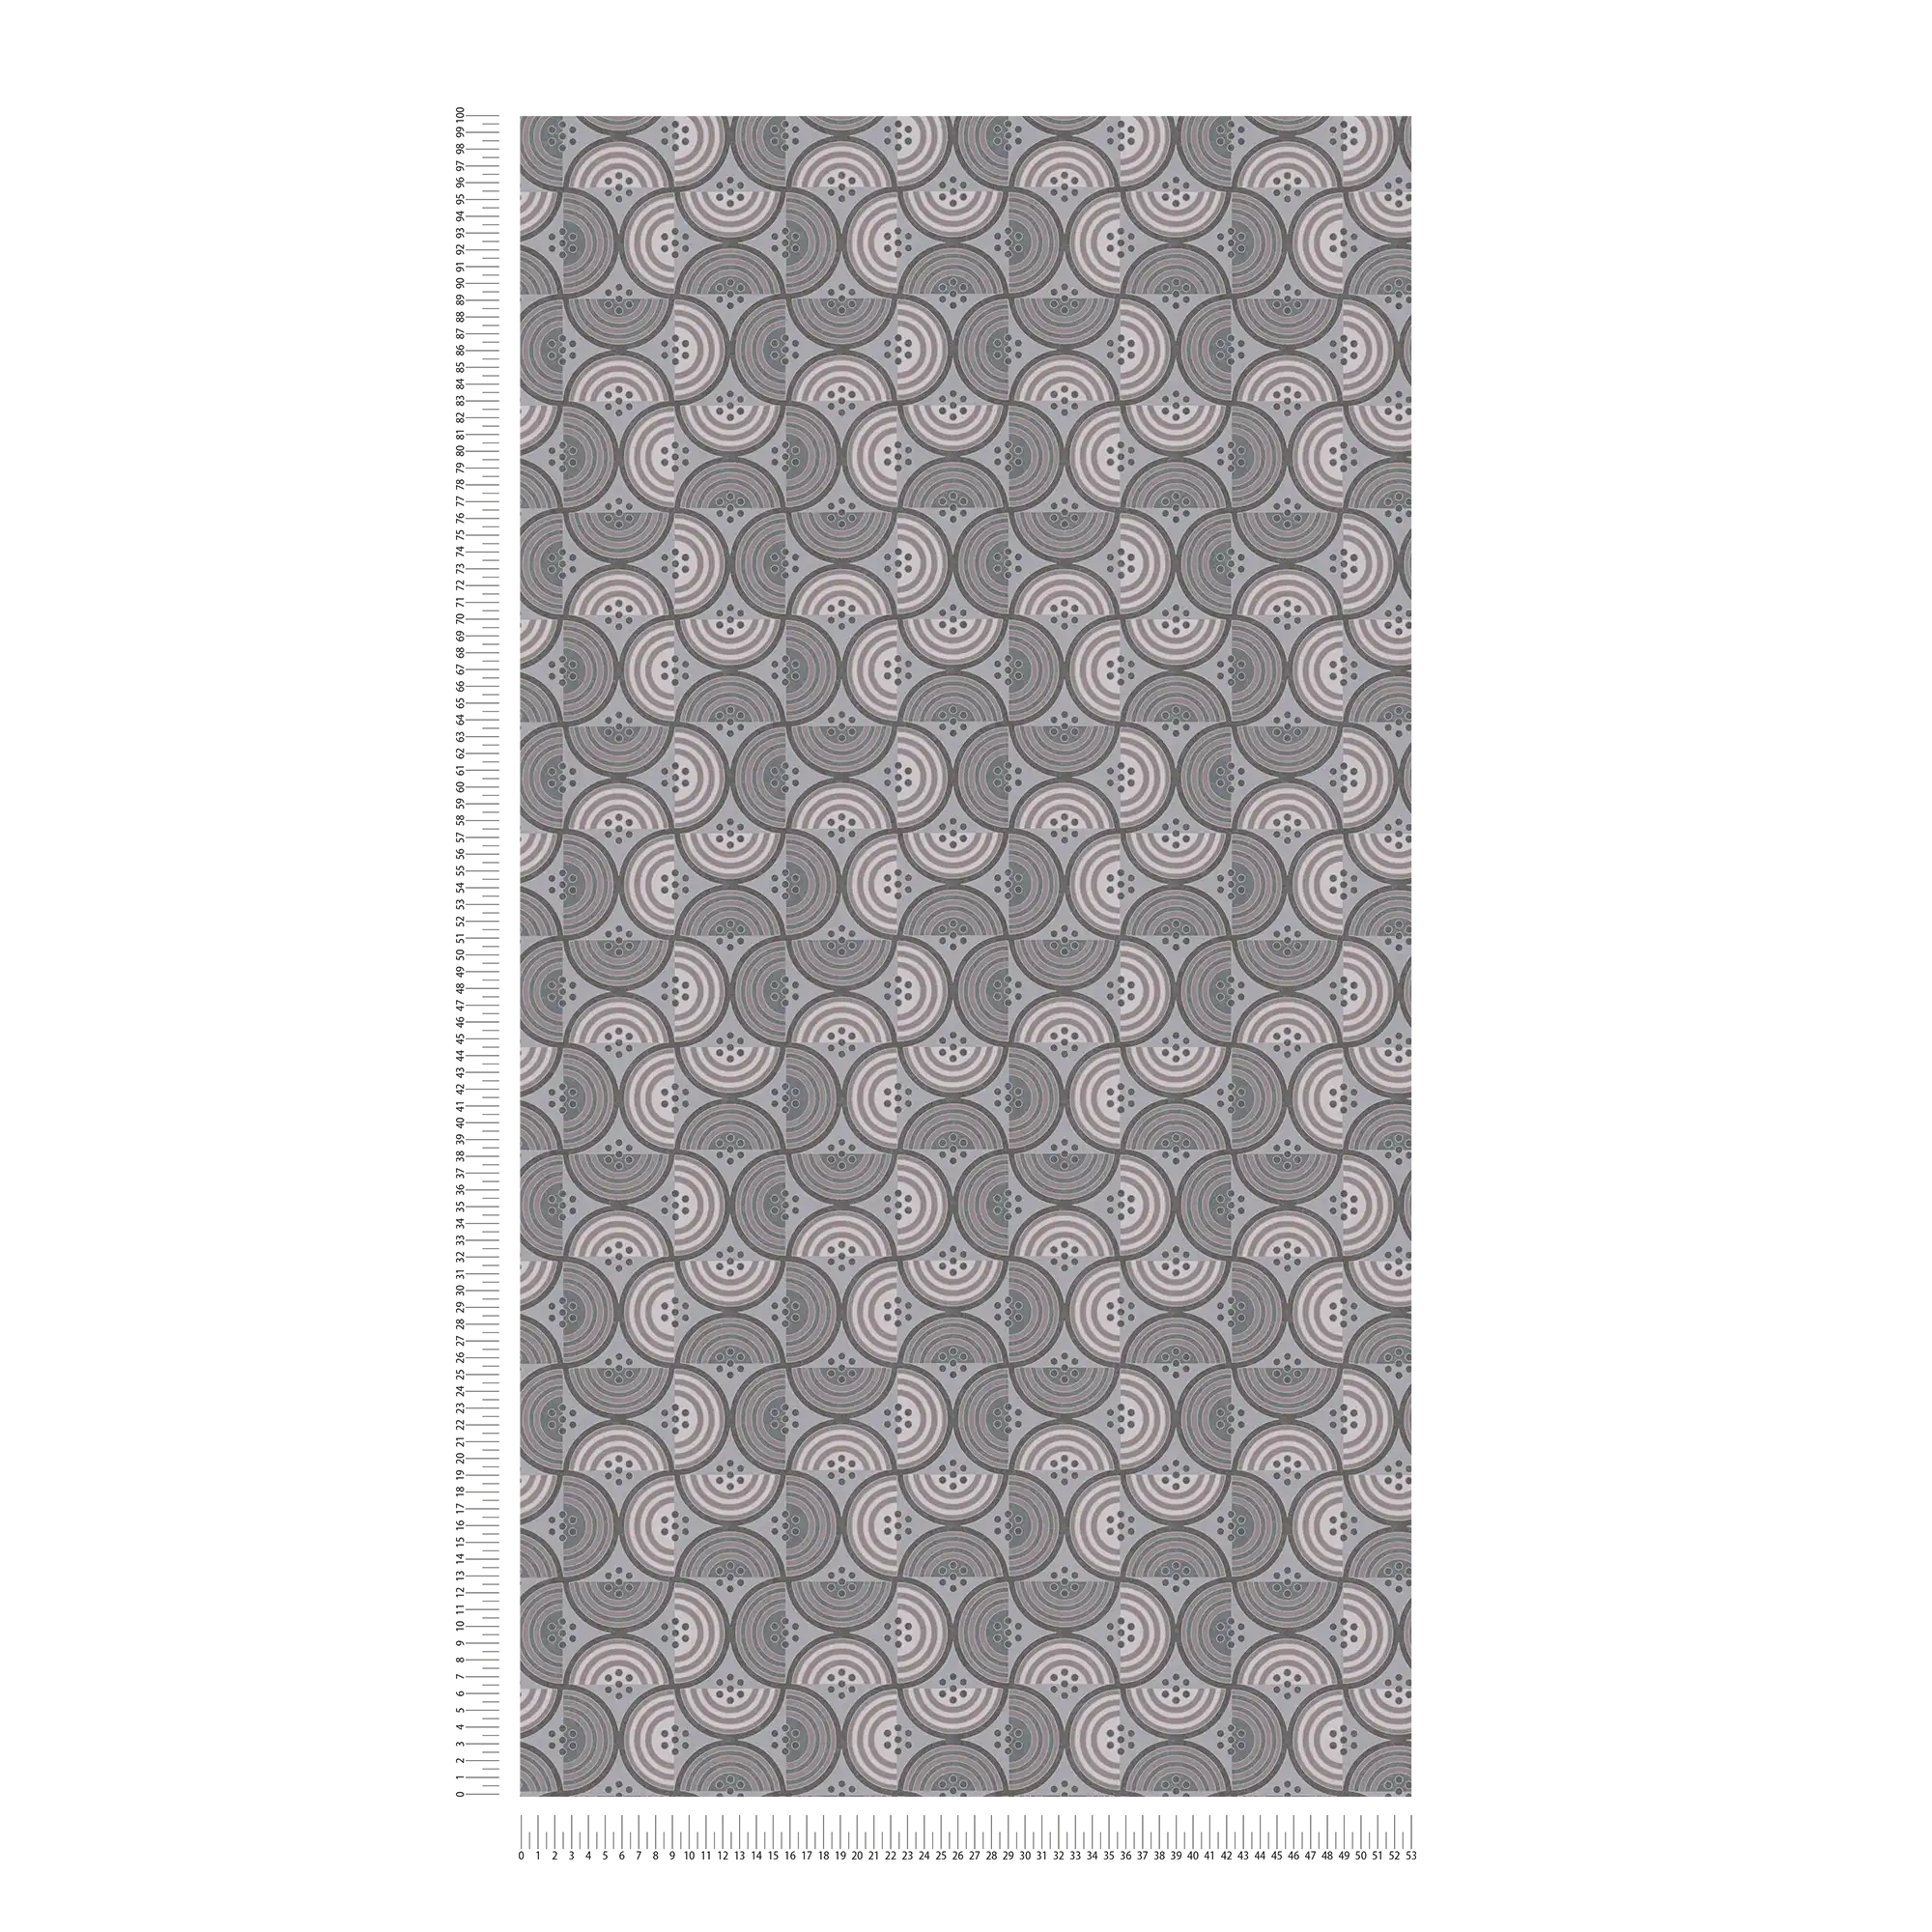             Graphic wallpaper with dot & half circle pattern - taupe, grey, cream
        